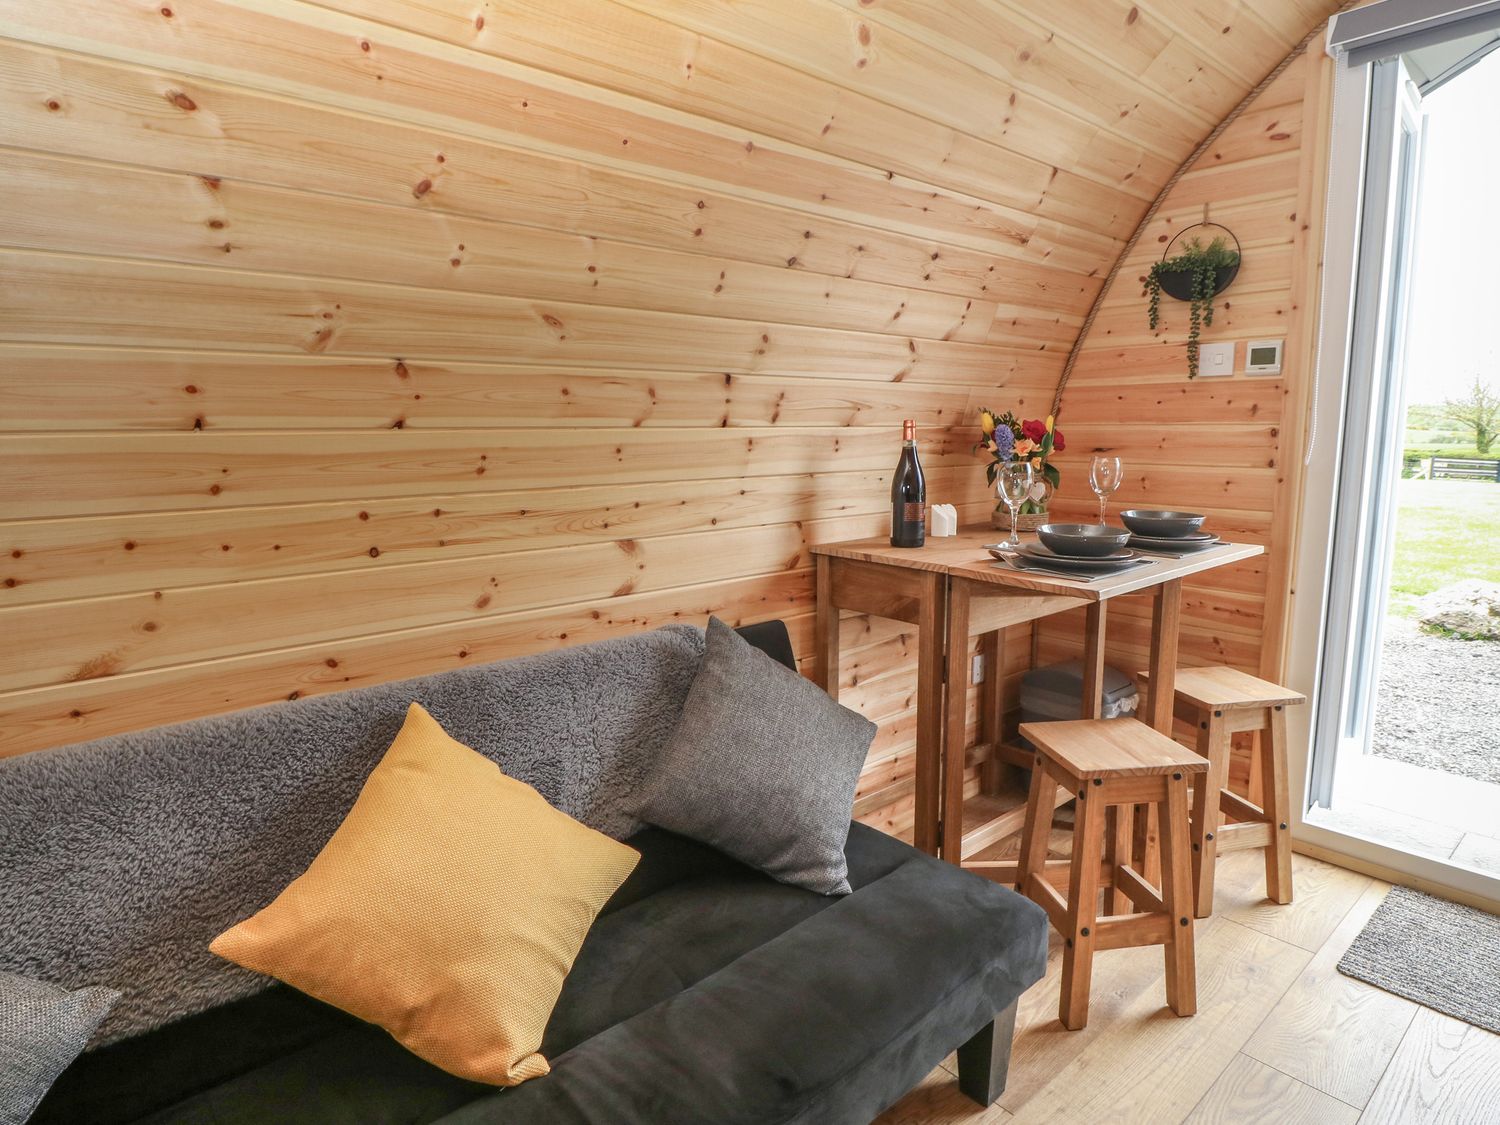 Parys Pod by Amlwch, Anglesey. Studio-style open-plan living, sofa bed, patio, hot tub, rural views.